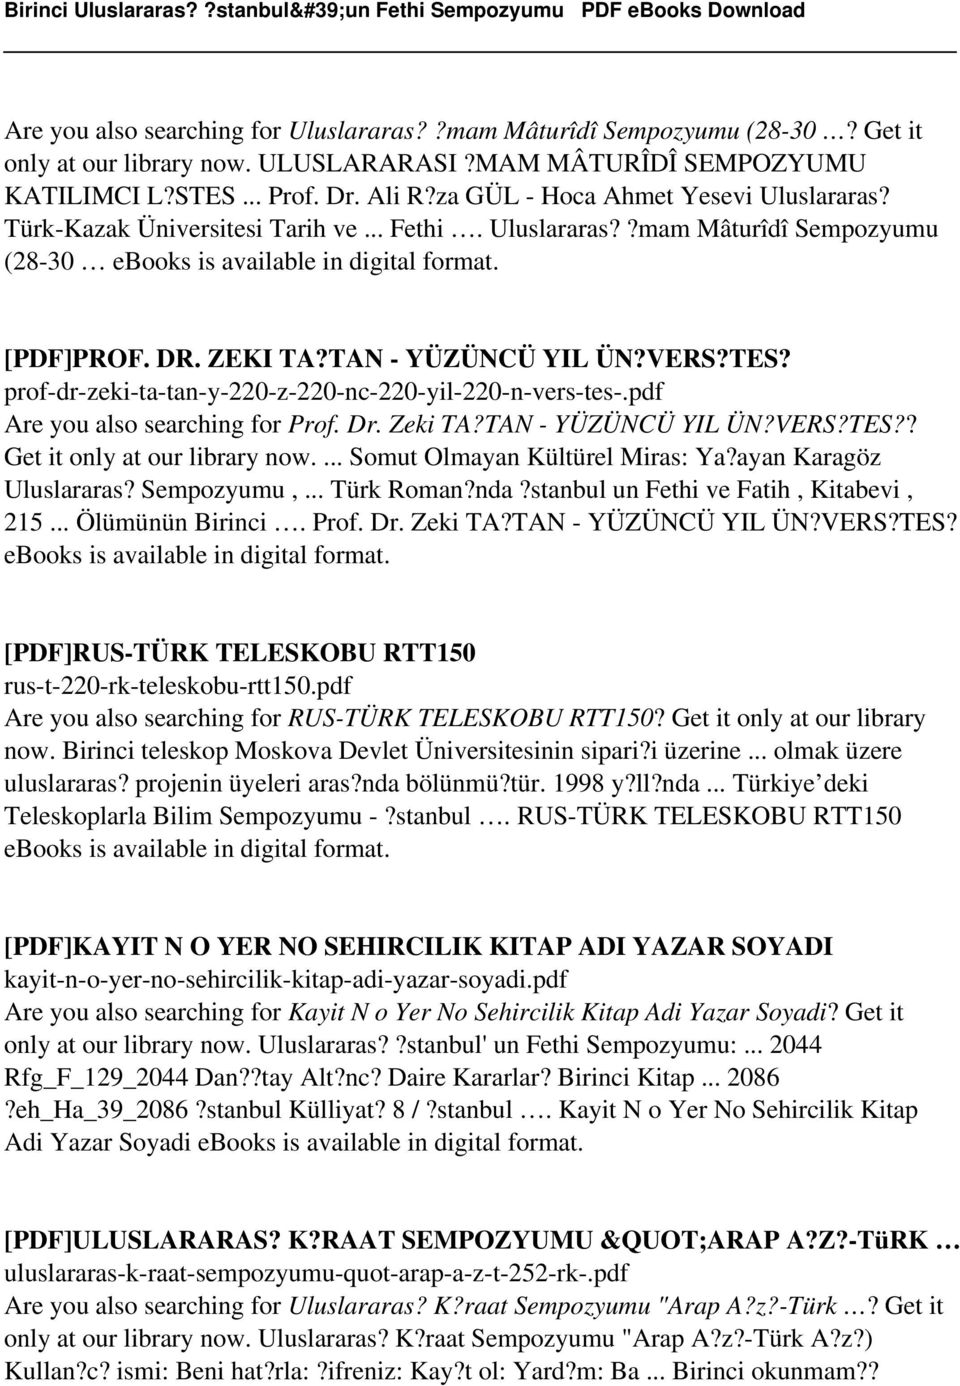 prof-dr-zeki-ta-tan-y-220-z-220-nc-220-yil-220-n-vers-tes-.pdf Are you also searching for Prof. Dr. Zeki TA?TAN - YÜZÜNCÜ YIL ÜN?VERS?TES?? Get it only at our library now.